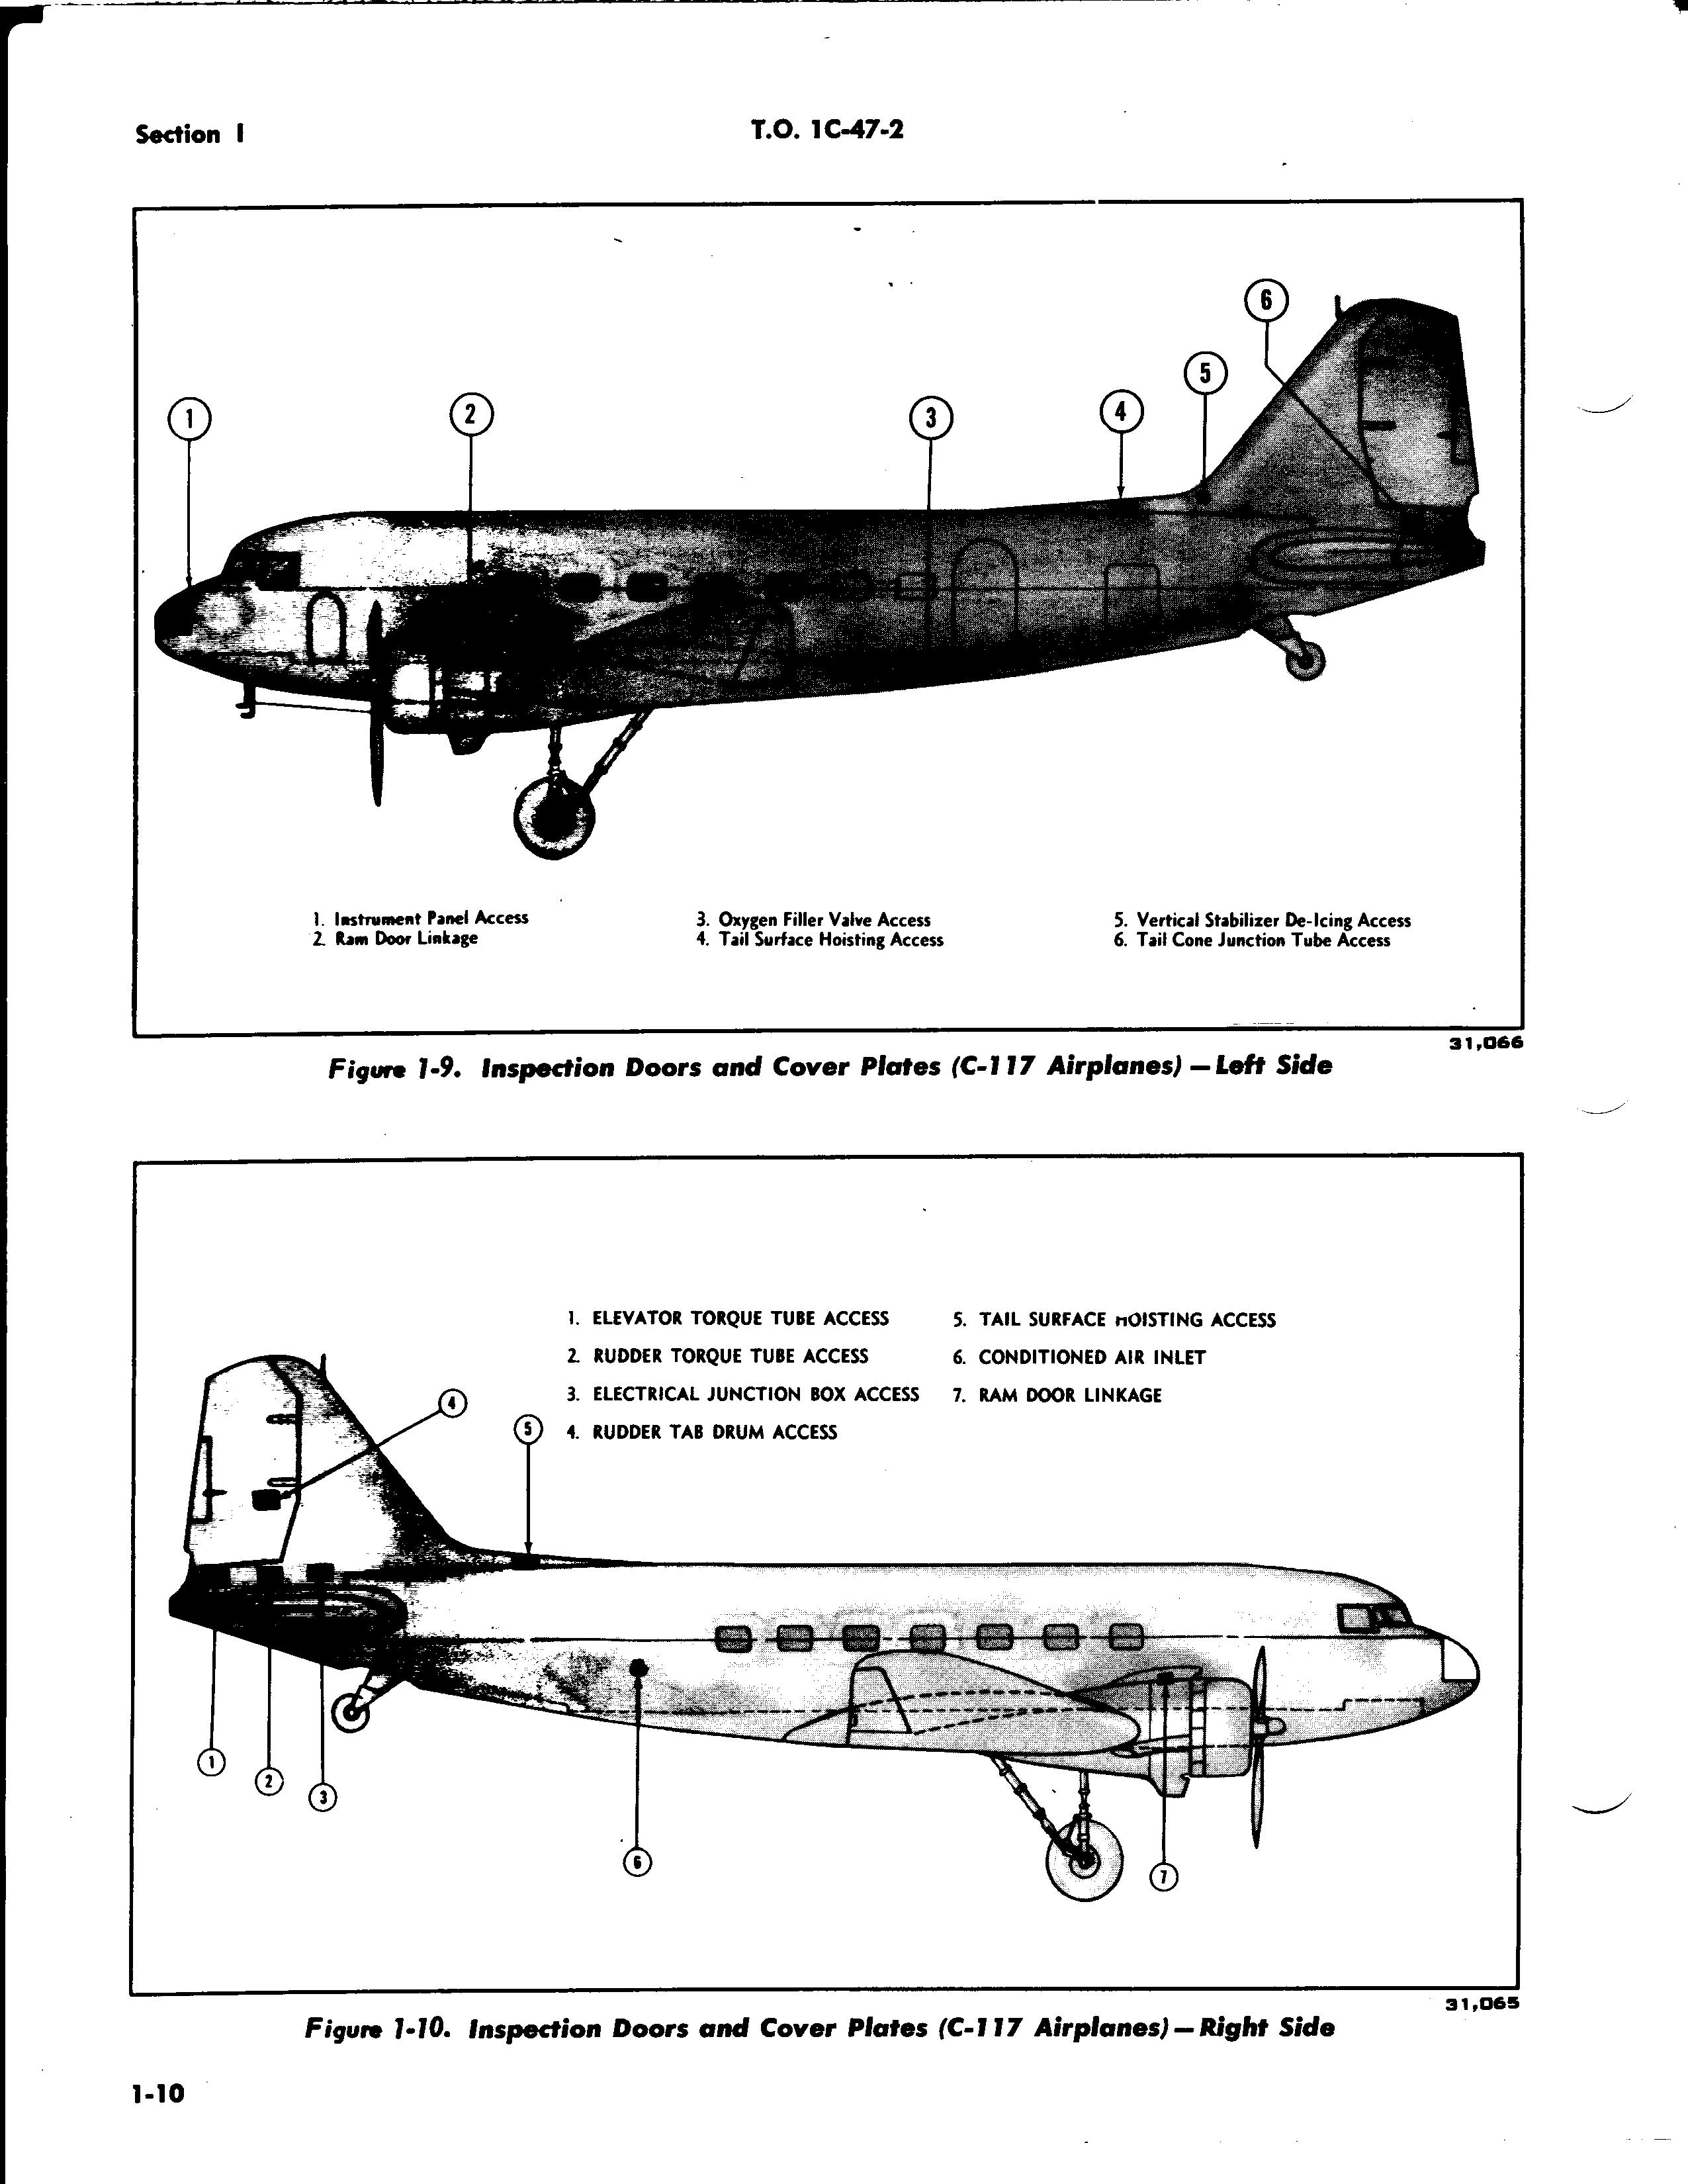 Sample page 54 from AirCorps Library document: Maintenance Instructions for C-47, A, B, D, C-117A and C-117B Aircraft